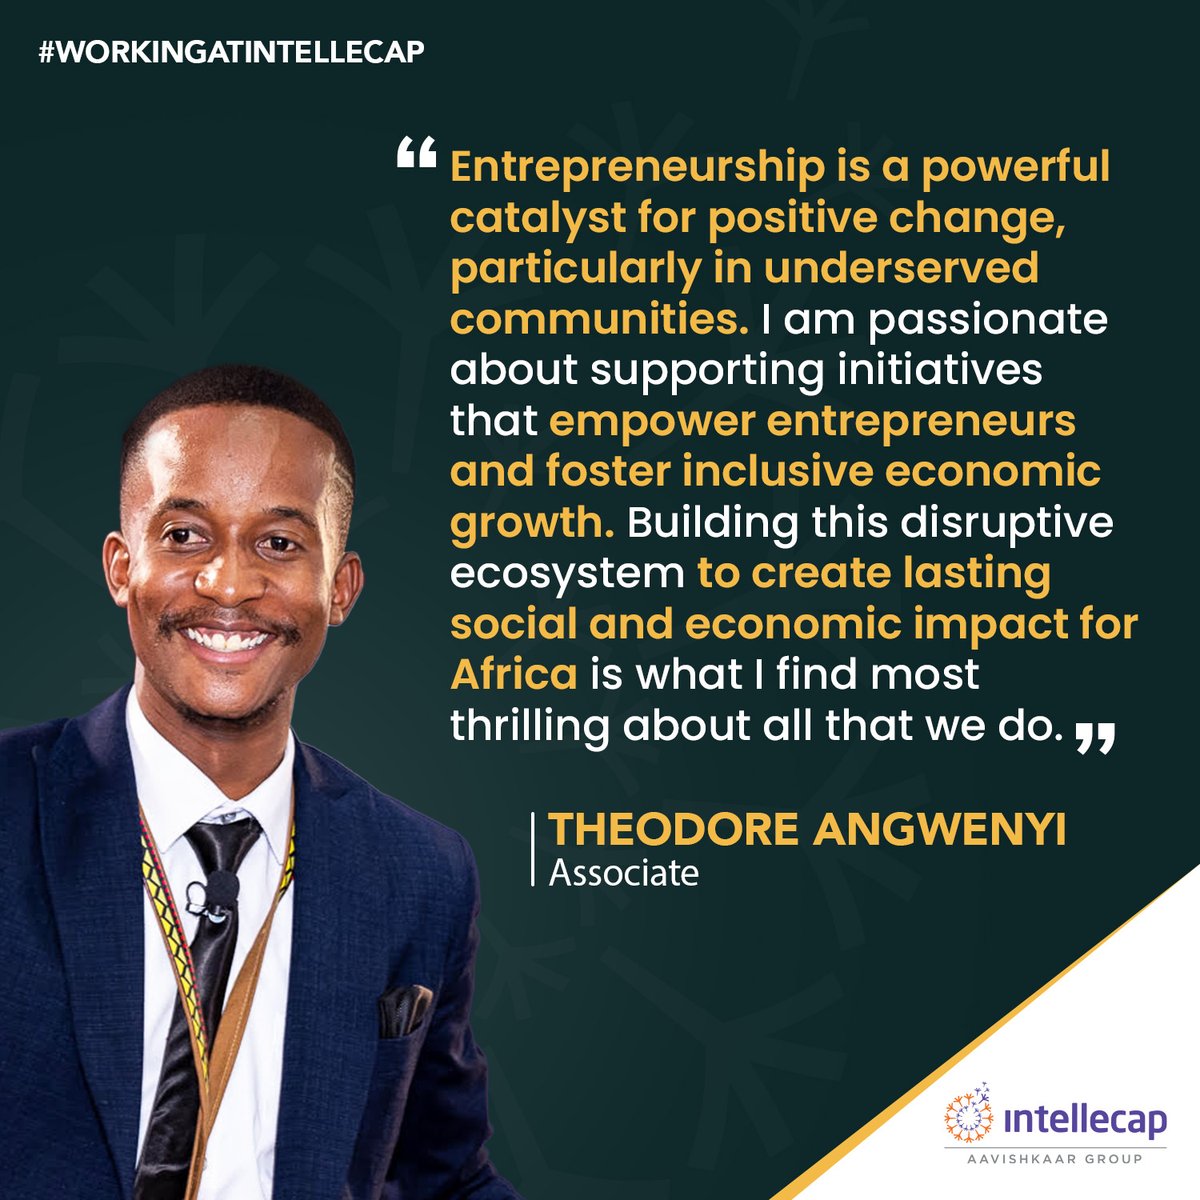 Theo is supporting impact-driven enterprises in accessing finance & scaling their business models. He is also implementing solutions that impact the broader economic development landscape. Ready to build a better Africa, write to career@intellecap.net #WorkingatIntellecap